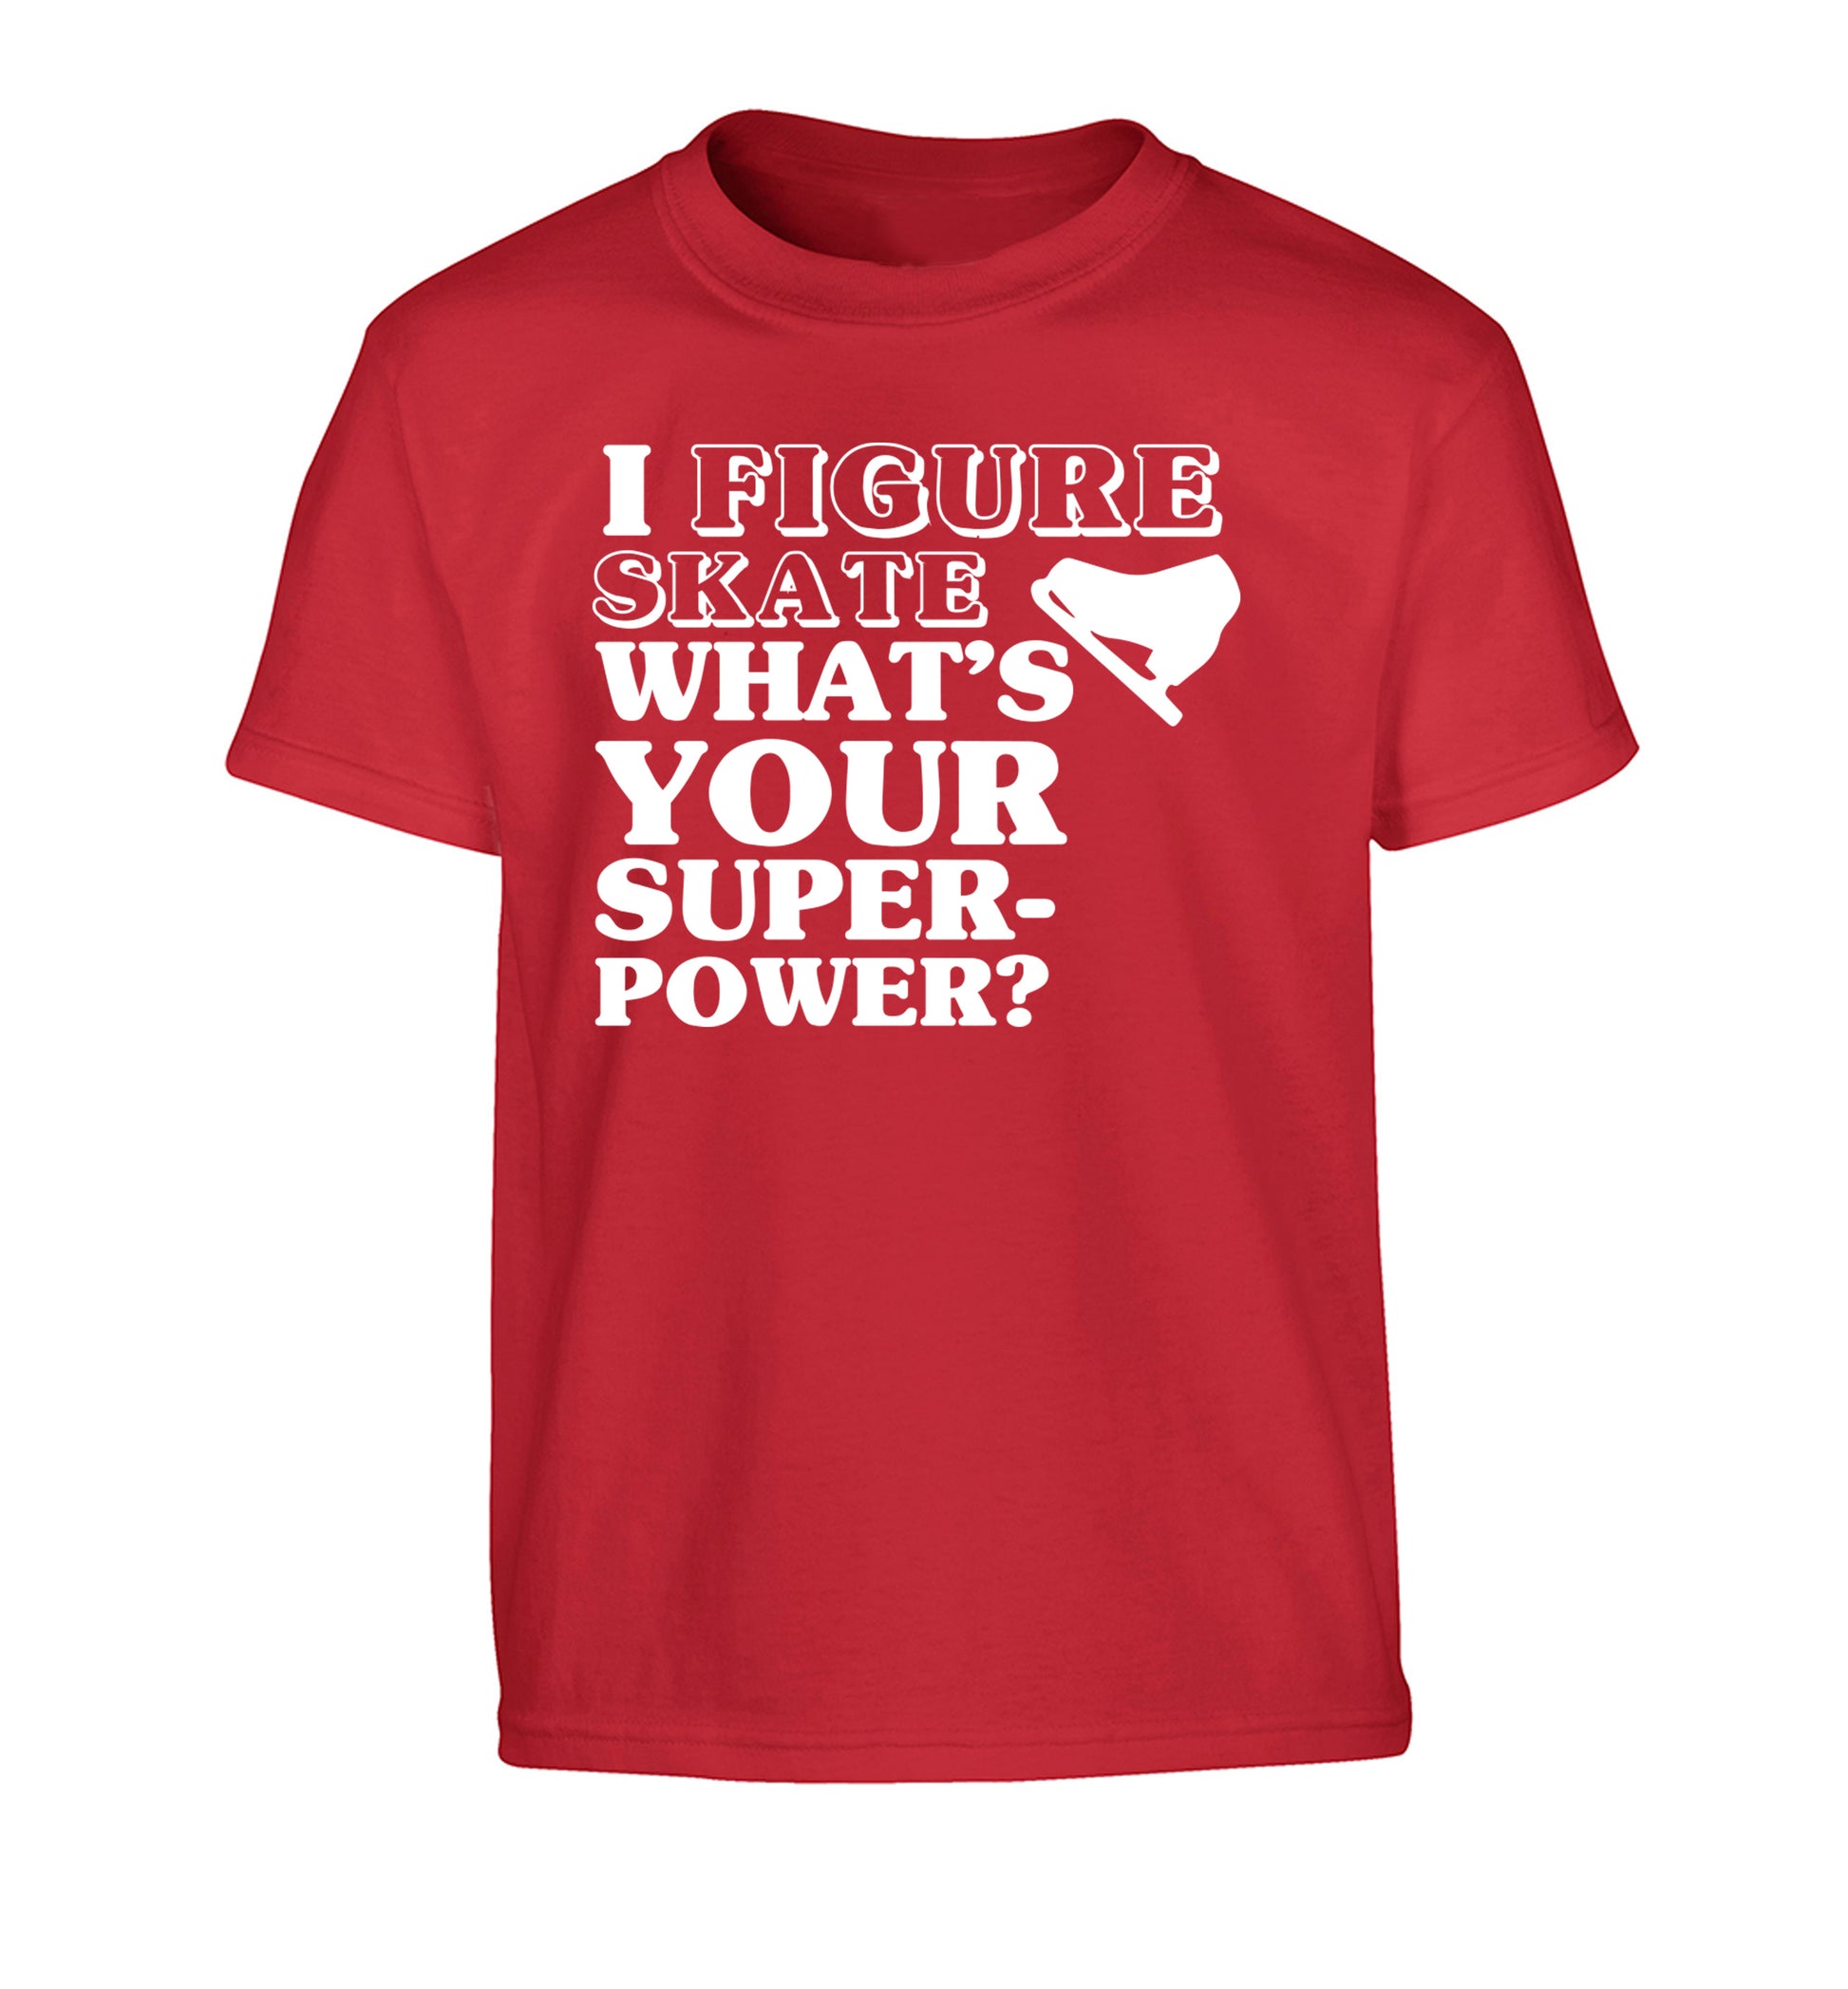 I figure skate what's your superpower? Children's red Tshirt 12-14 Years